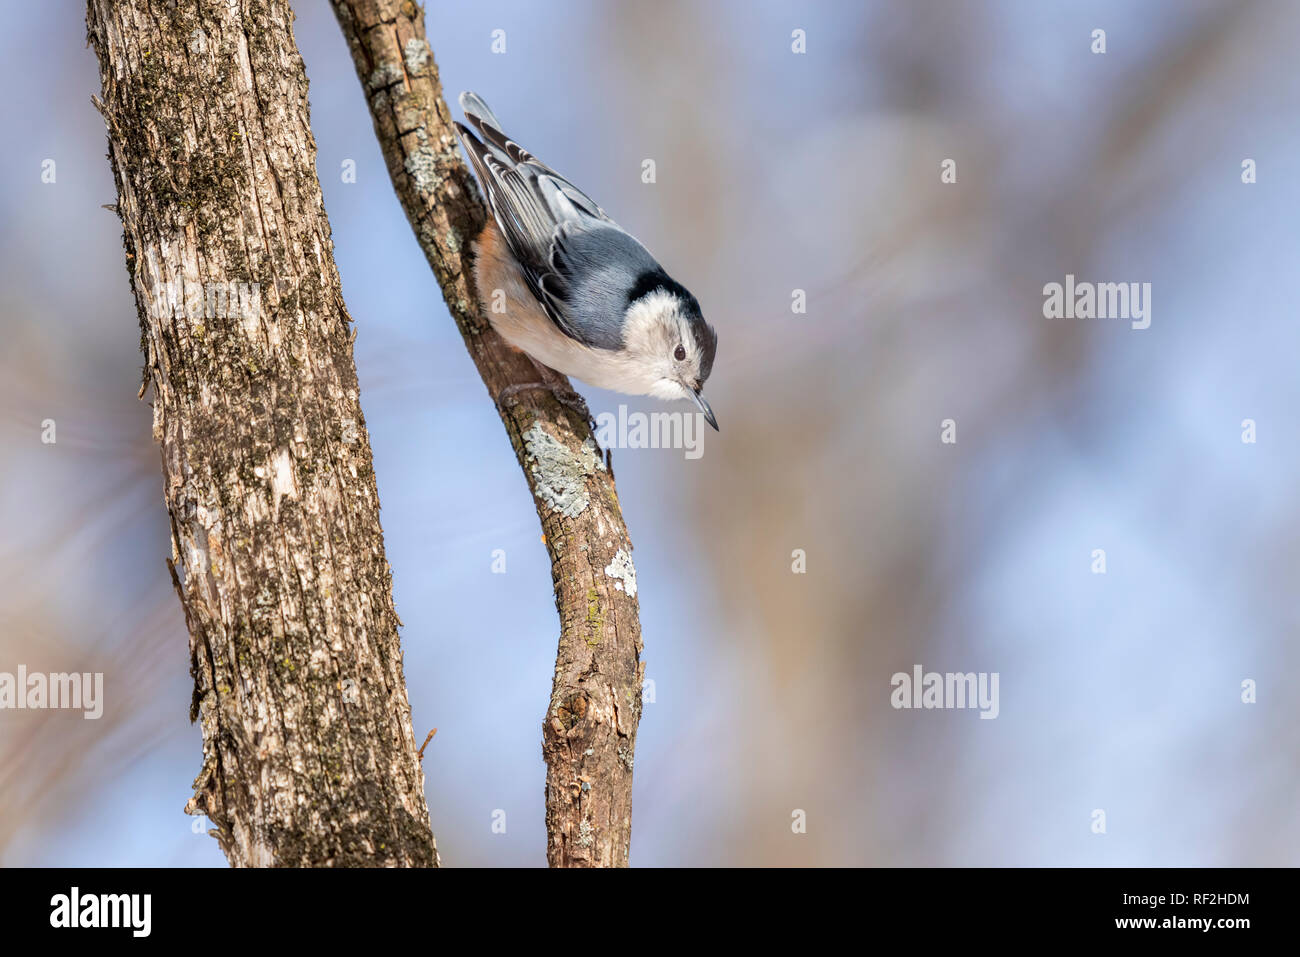 White Breasted Nuthatch climbing down tree in the winter. Stock Photo